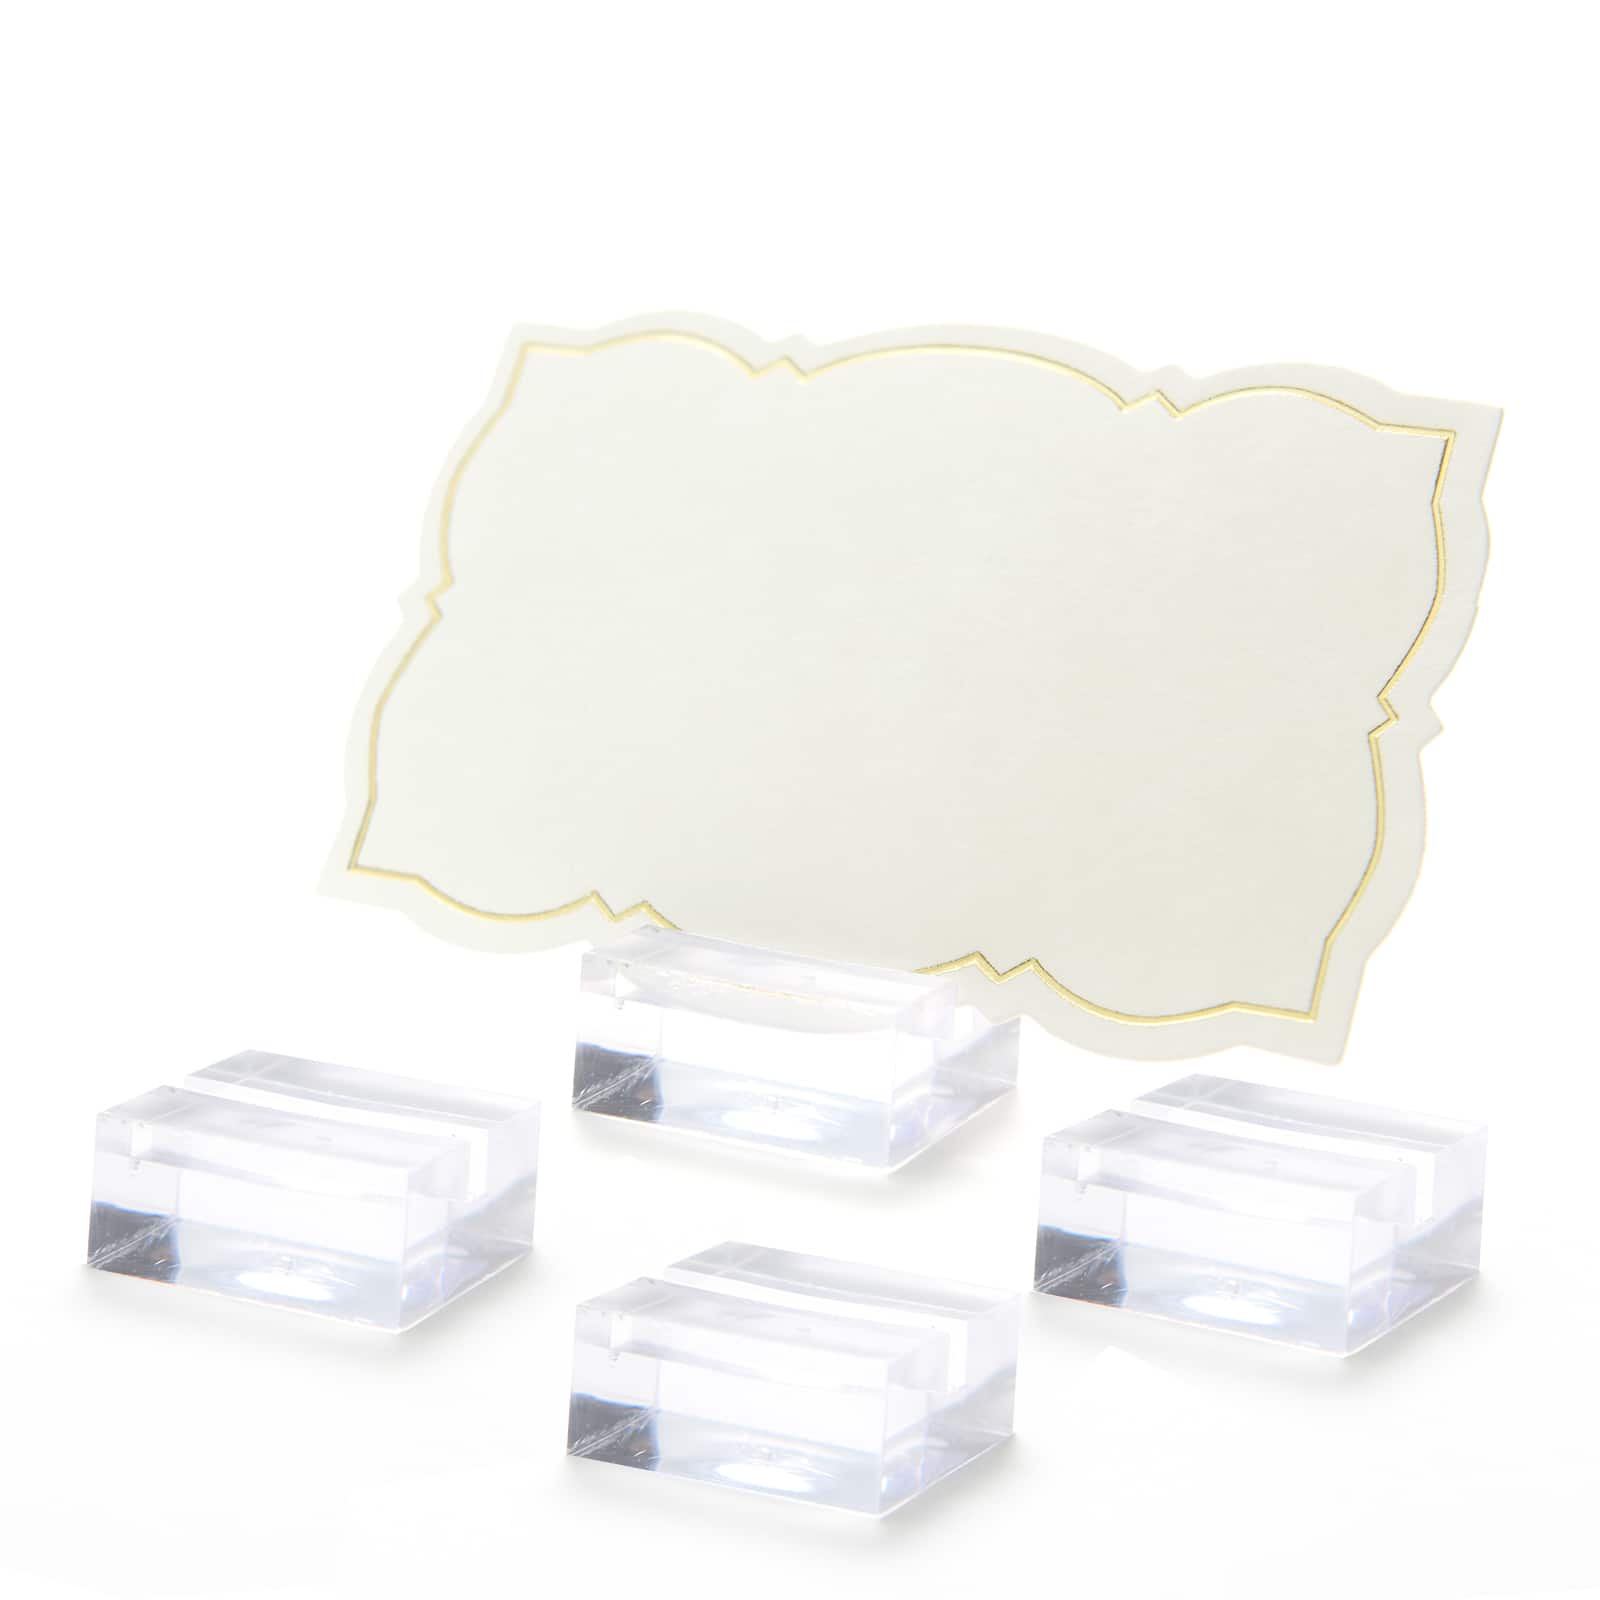 where to buy place cards